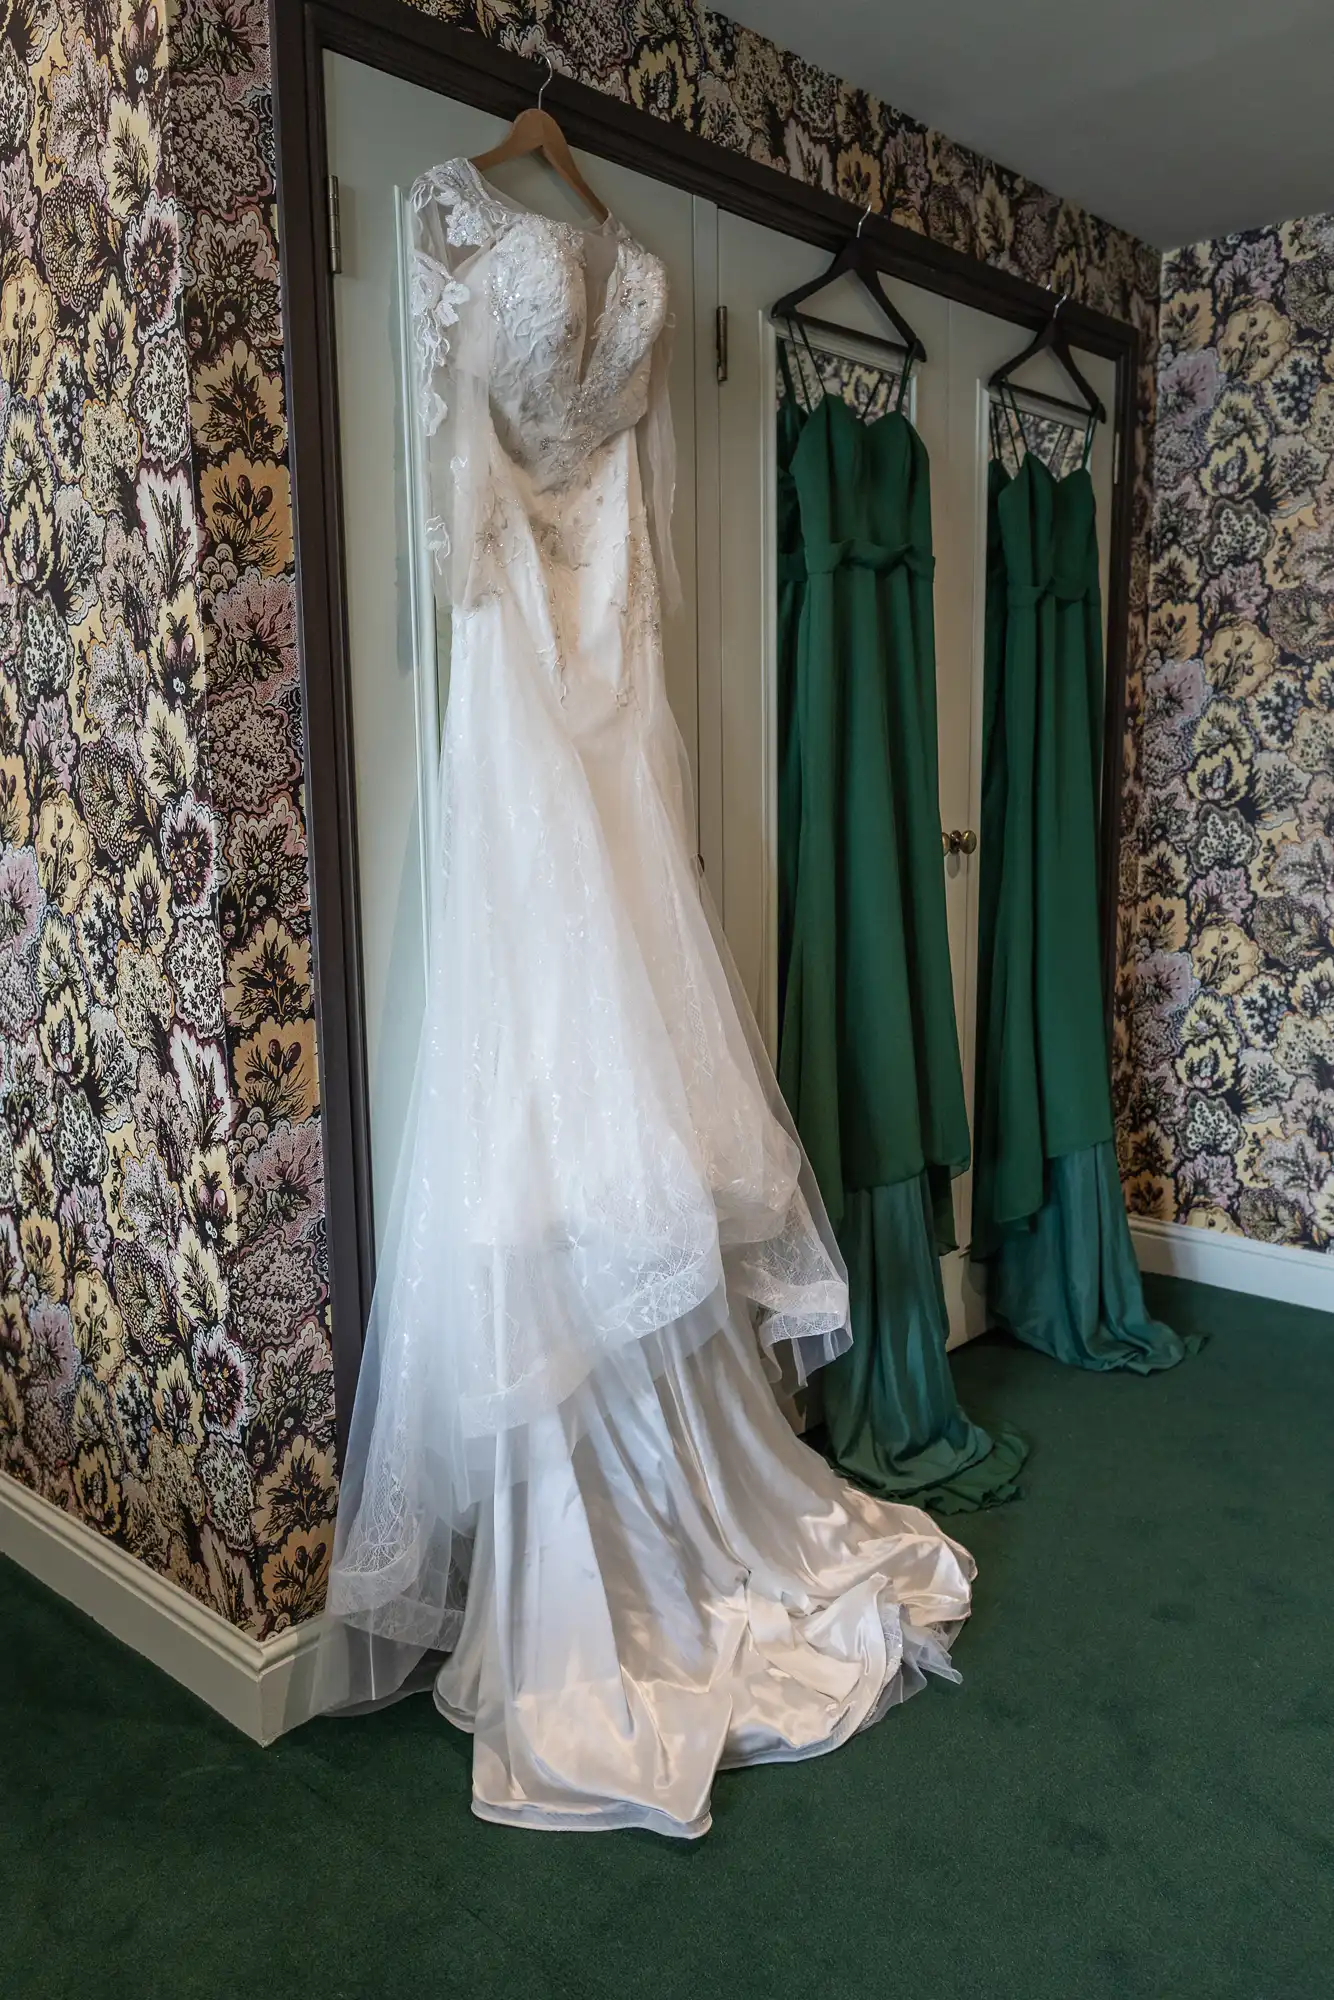 A white wedding dress with lace details hangs beside two dark green bridesmaid dresses in a room with floral wallpaper.